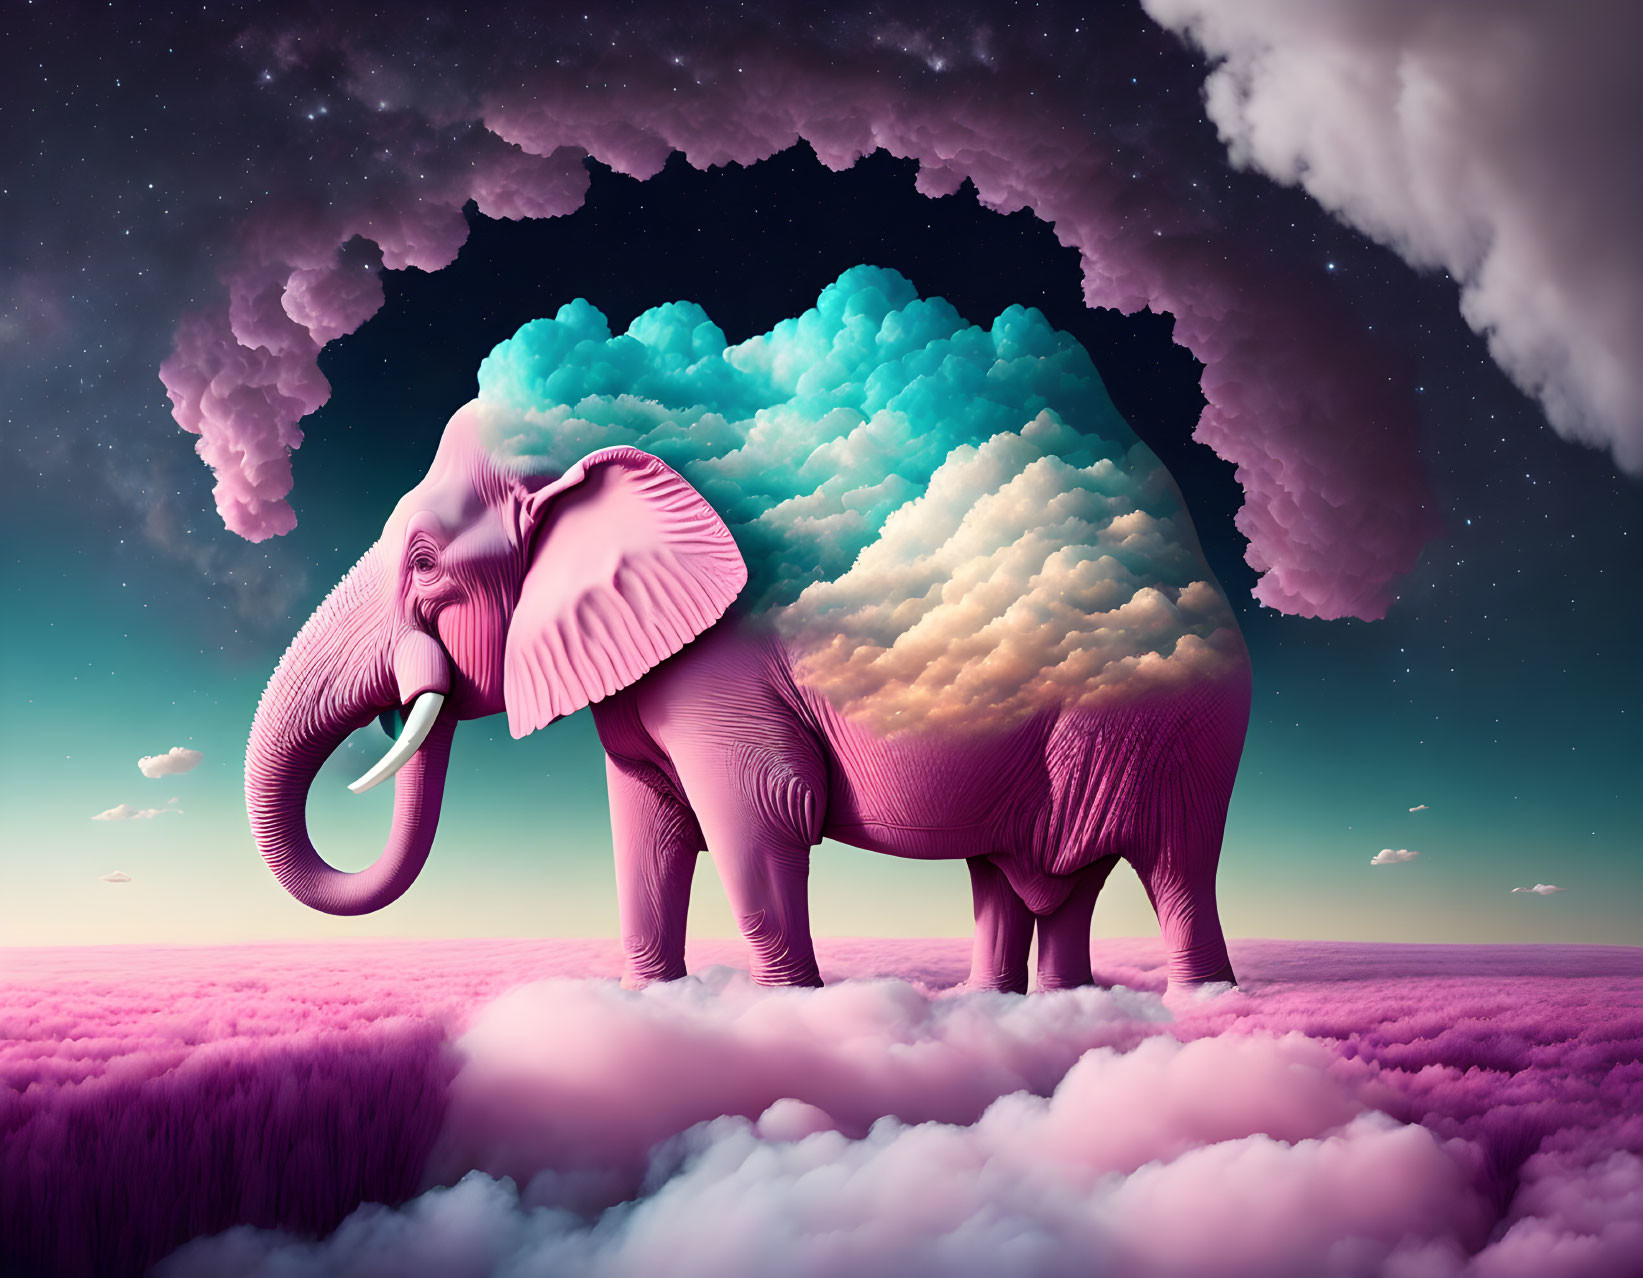 Pink elephant made from clouds. Dan Mountford, Chr